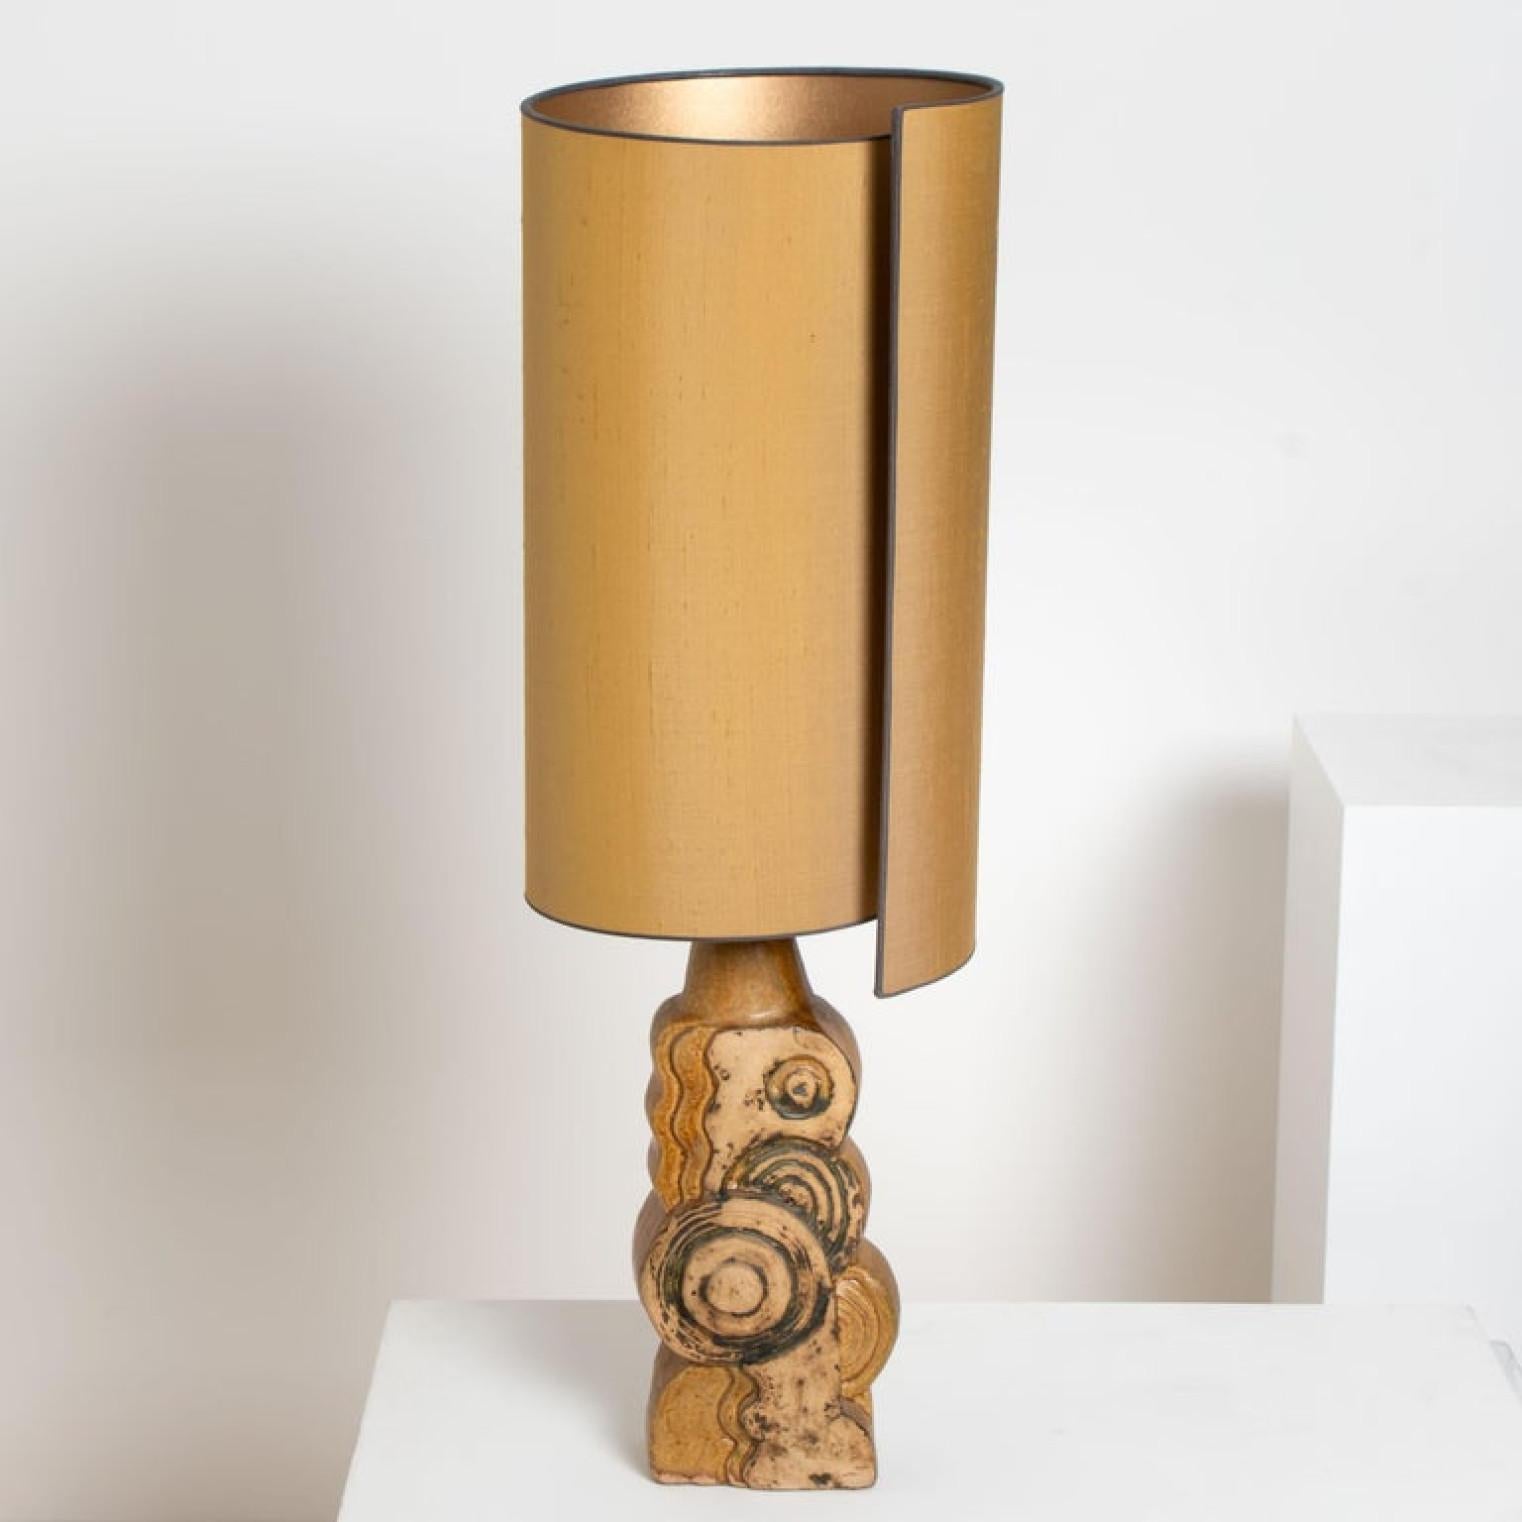 Mid-Century Modern B. Rooke Ceramic Lamp with New Custom Made Lampshade by René Houben, 1960s For Sale